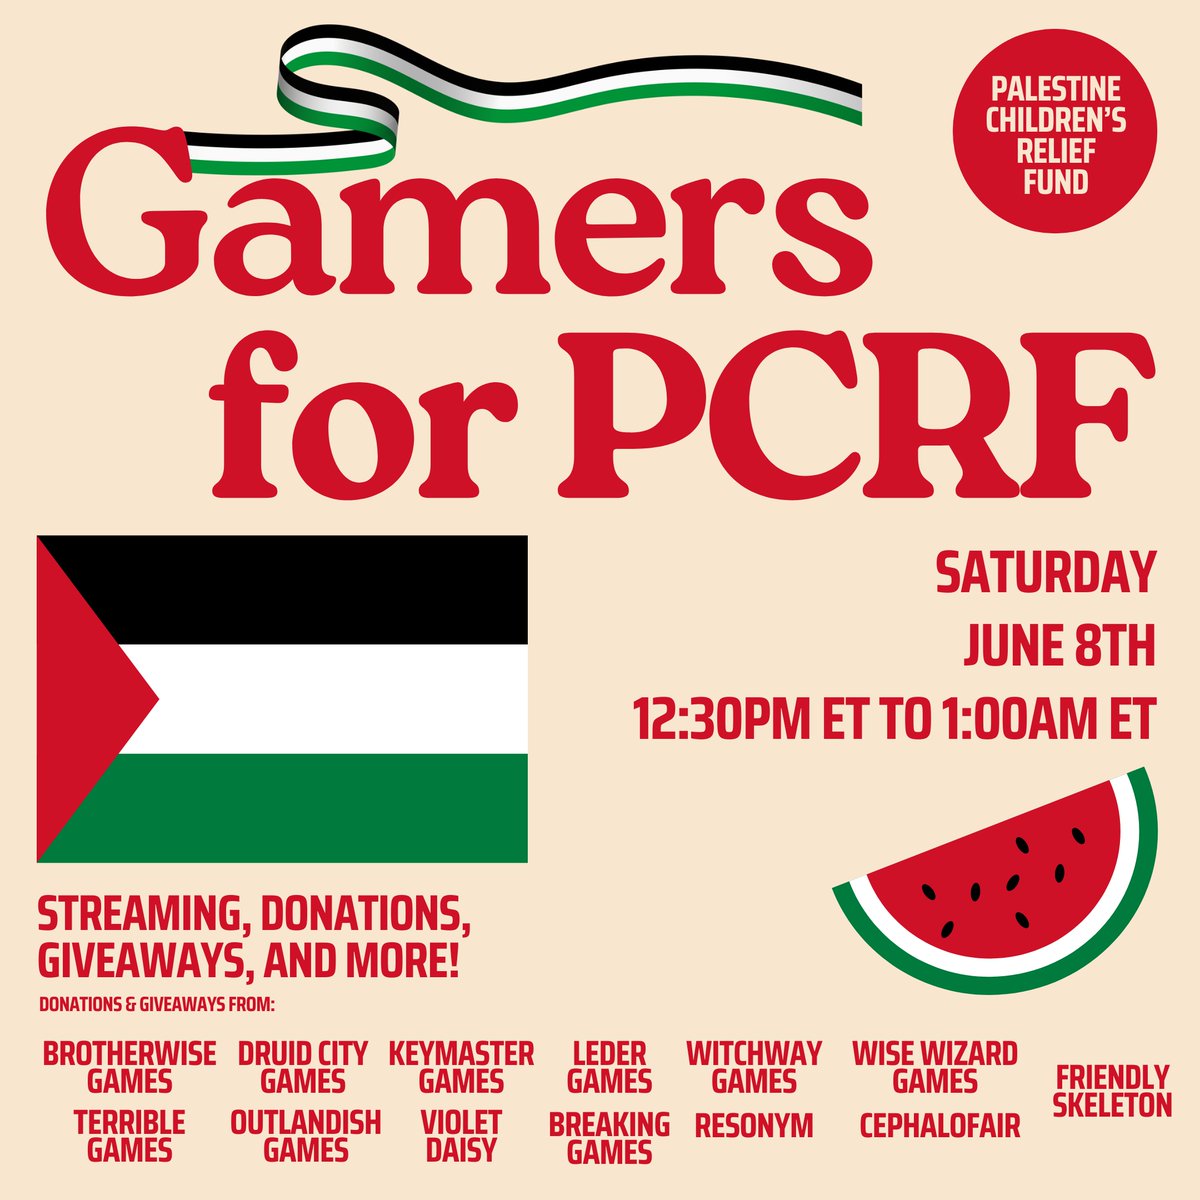 Y'all heard it here first! The Gamers for PCRF Event is happening on Saturday, June 8th from 12:30PM ET to 1:00AM ET. Thank you to the many publishers, designers, artists, journalists, content creators, influencers, and more for being a part of this ⬇️